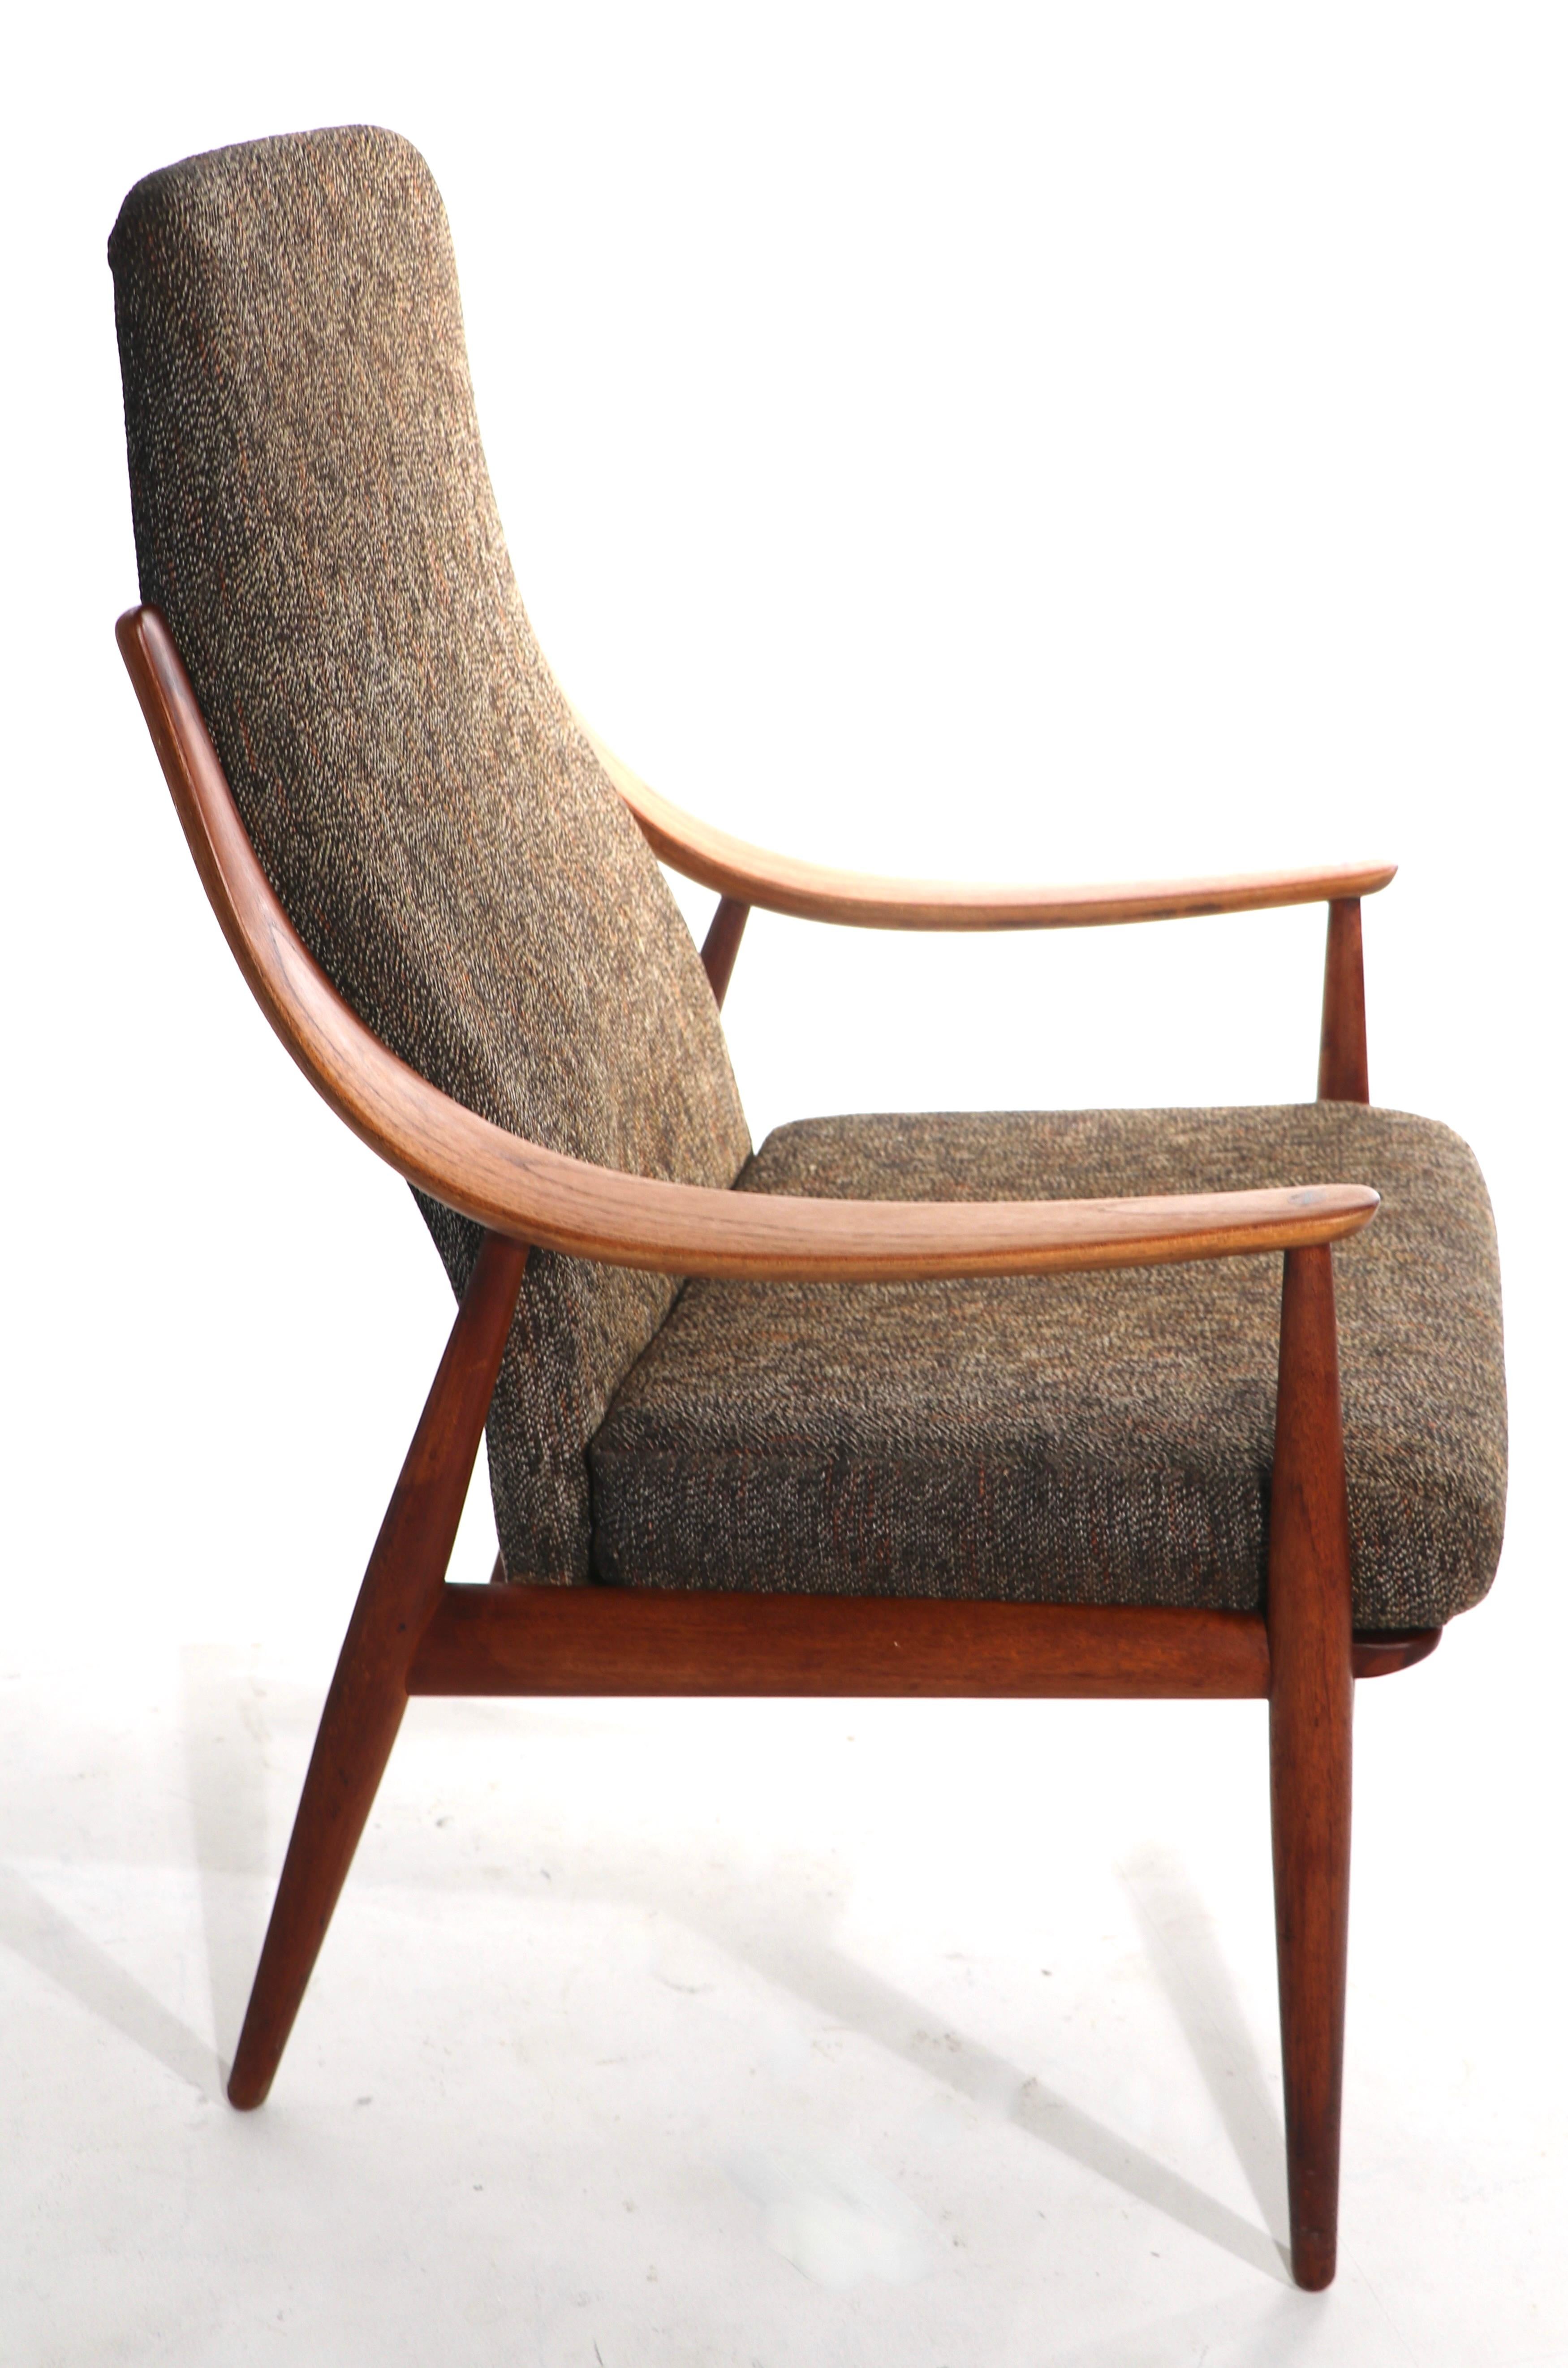 Dramatic high back version of the iconic Hvidt - Molgaard lounge chair, made by France and Daverkorsen, distributed by John Stuart Inc. This example is in very fine, original, untouched condition, clean and ready to use. Solid teak frame supports